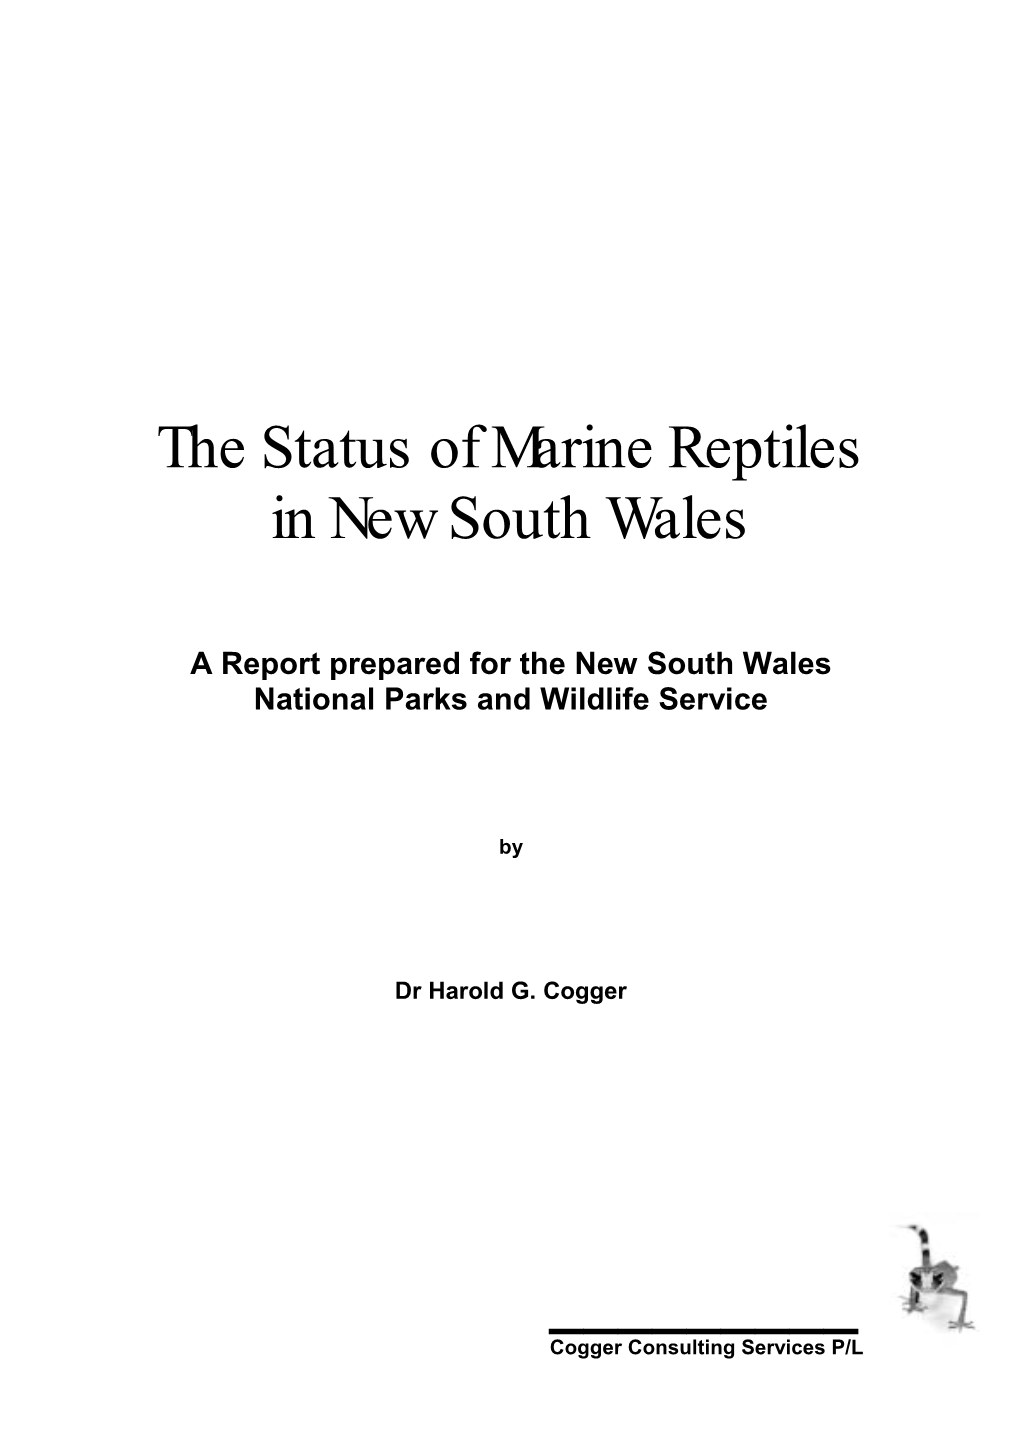 The Status of Marine Reptiles in New South Wales